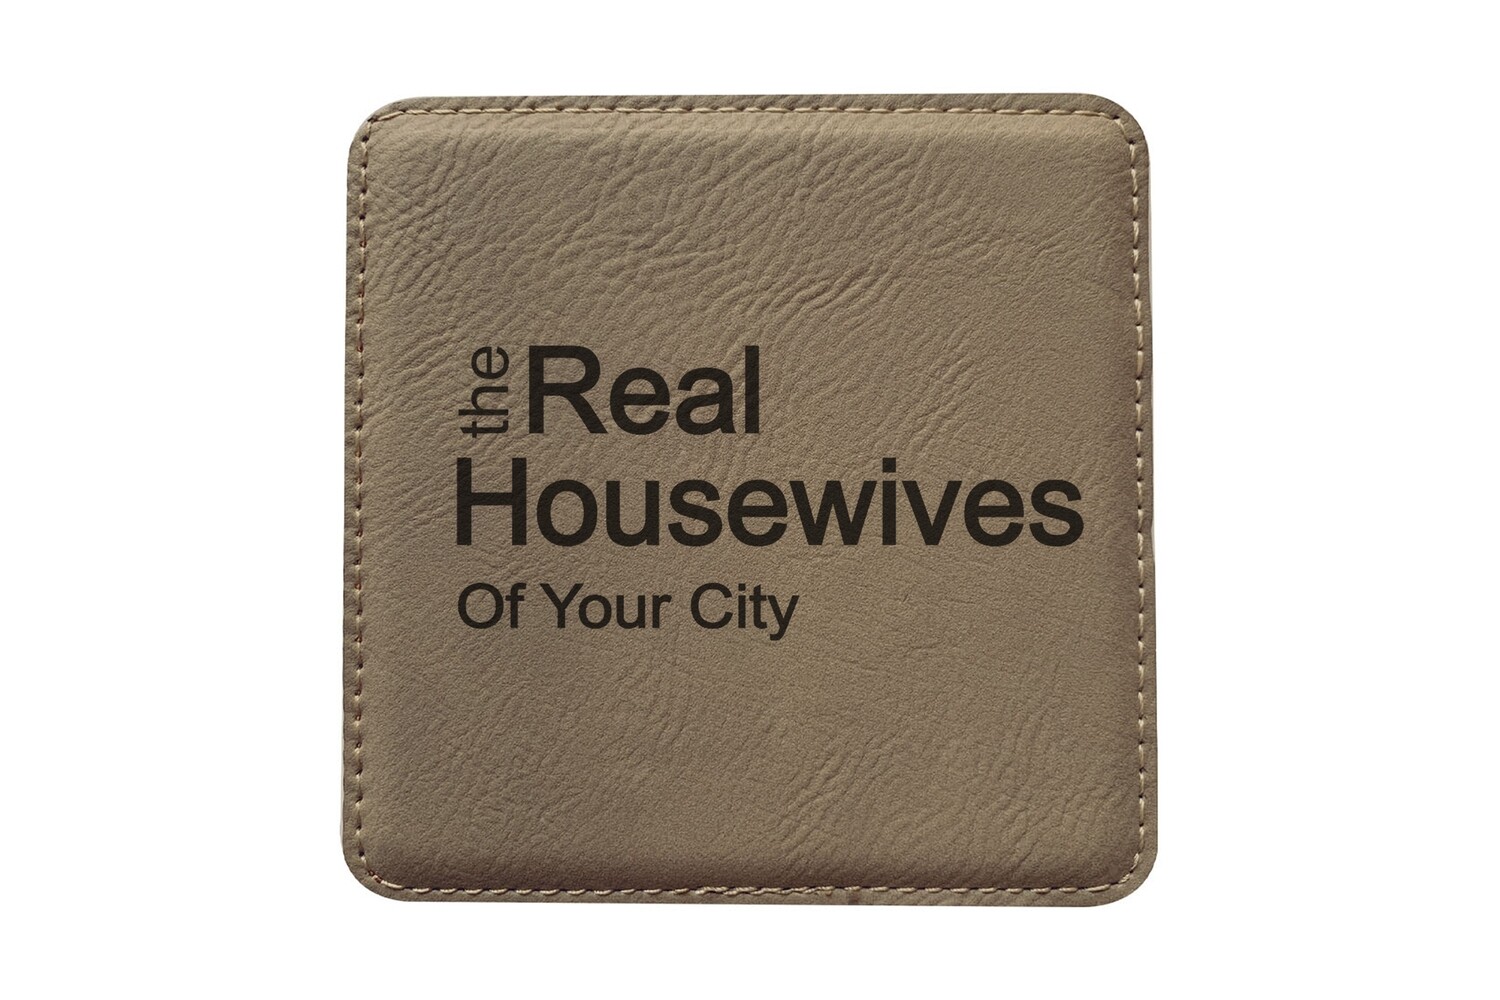 The Real Housewives (Add Your Custom Location) Leatherette Coaster Set